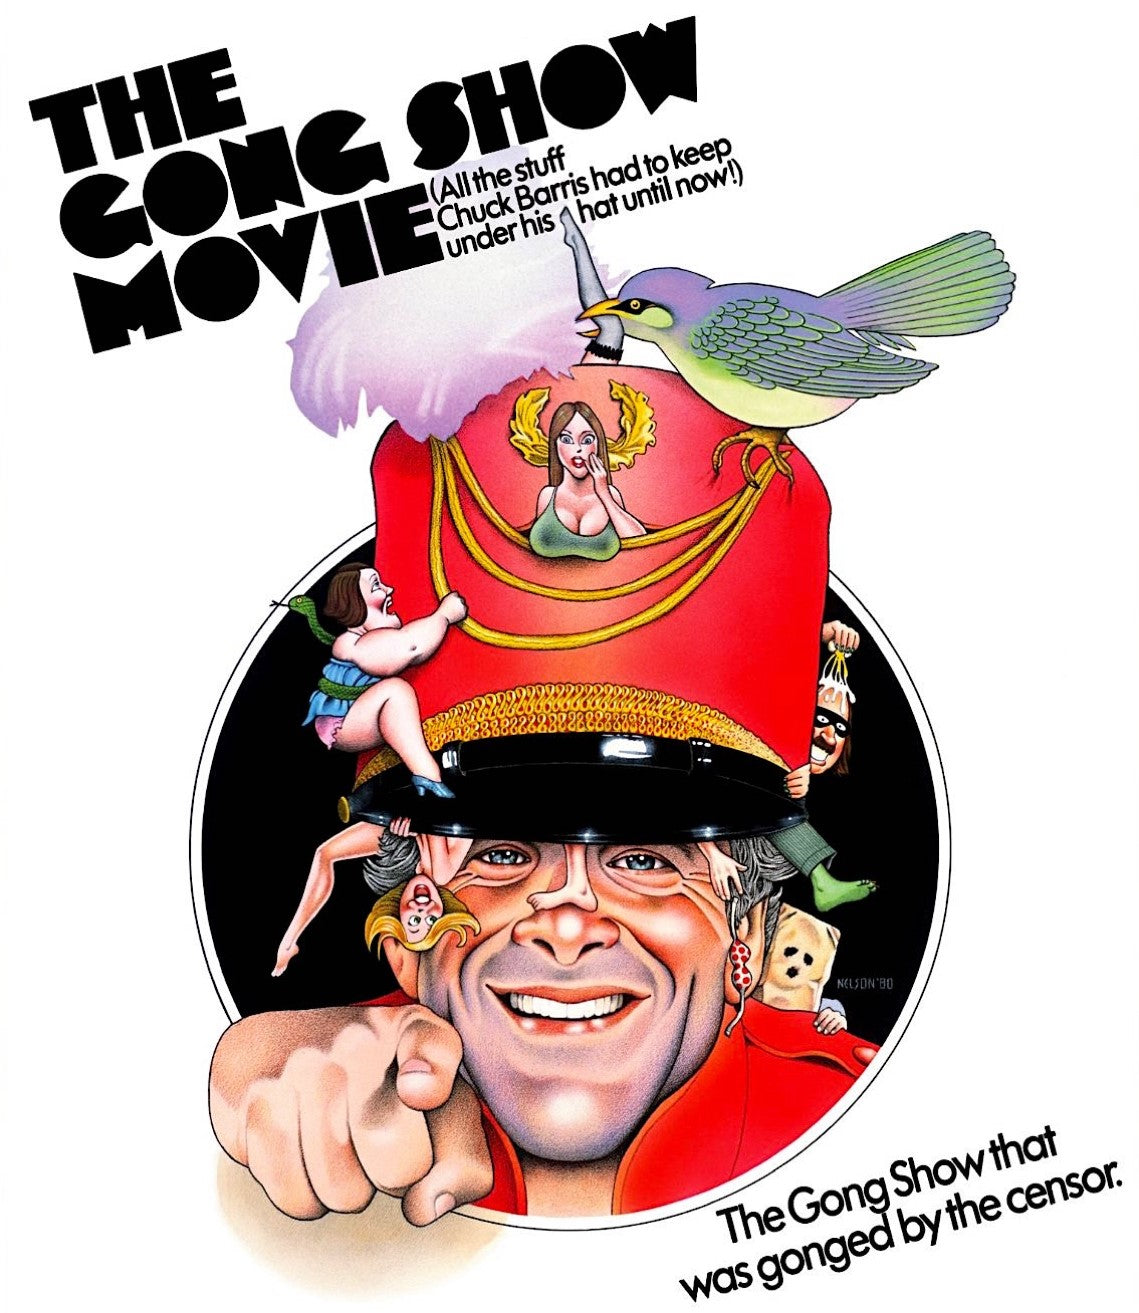 THE GONG SHOW MOVIE BLU-RAY